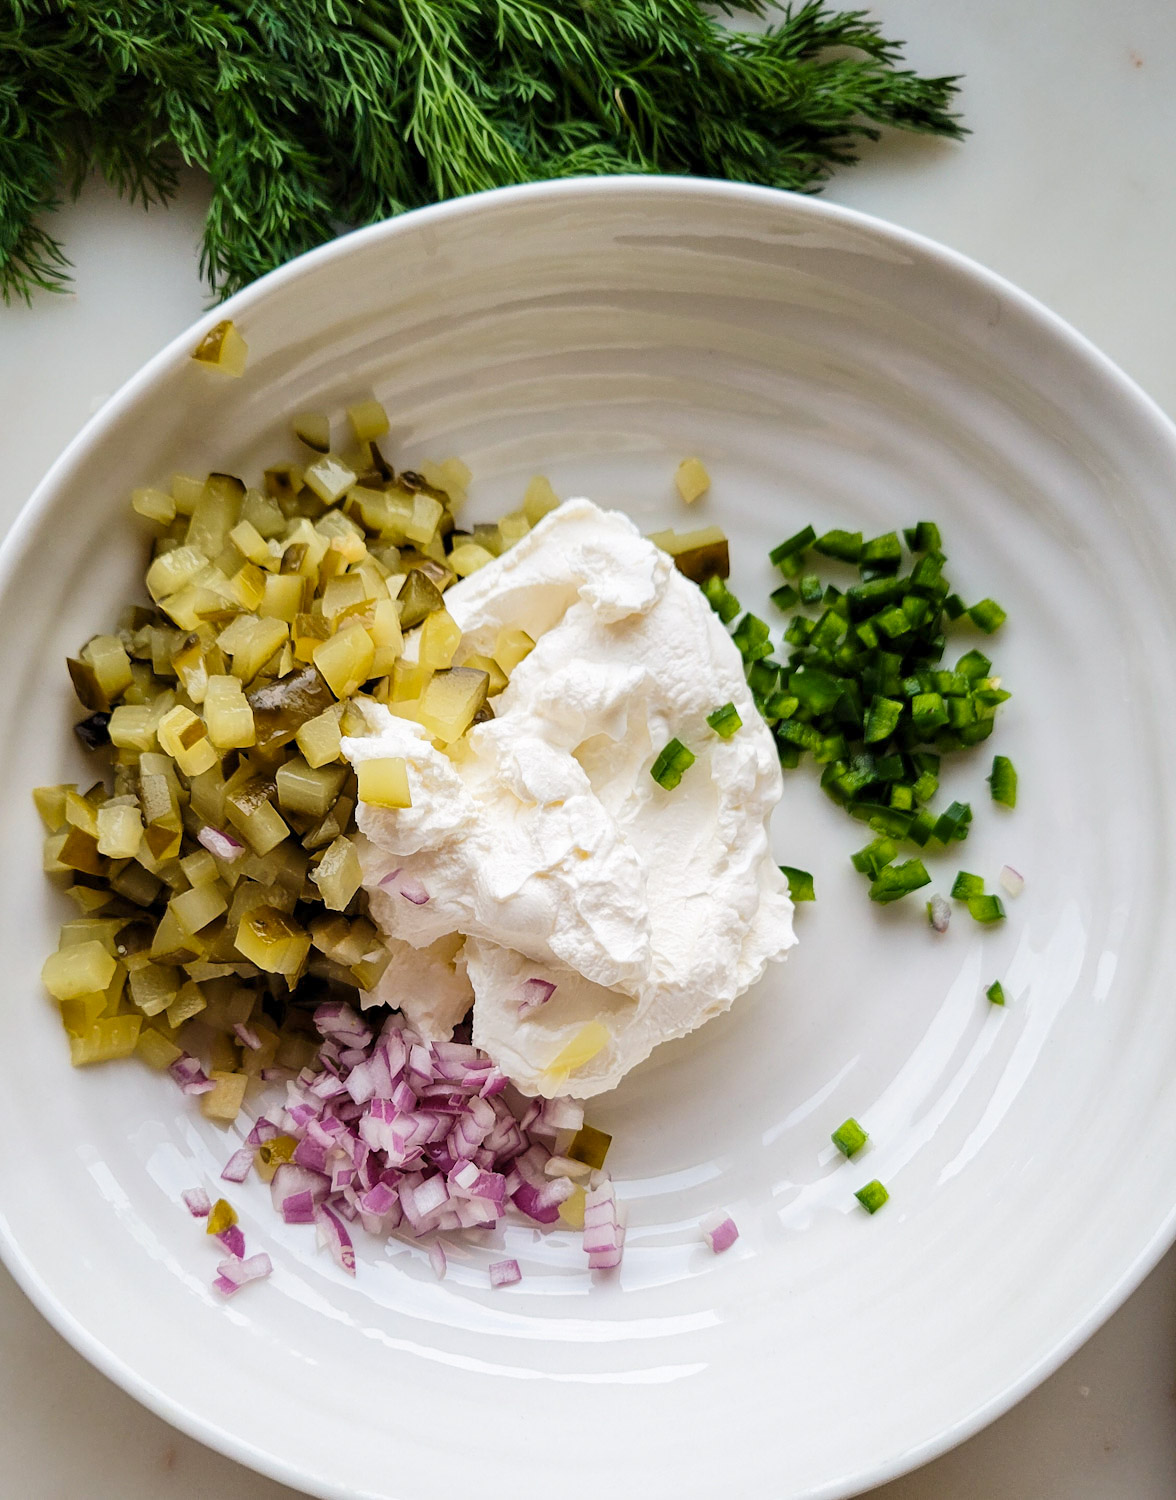 A bowl filled with the ingredients needed to make Dill Pickle Dip with Jalapeno Pepper.